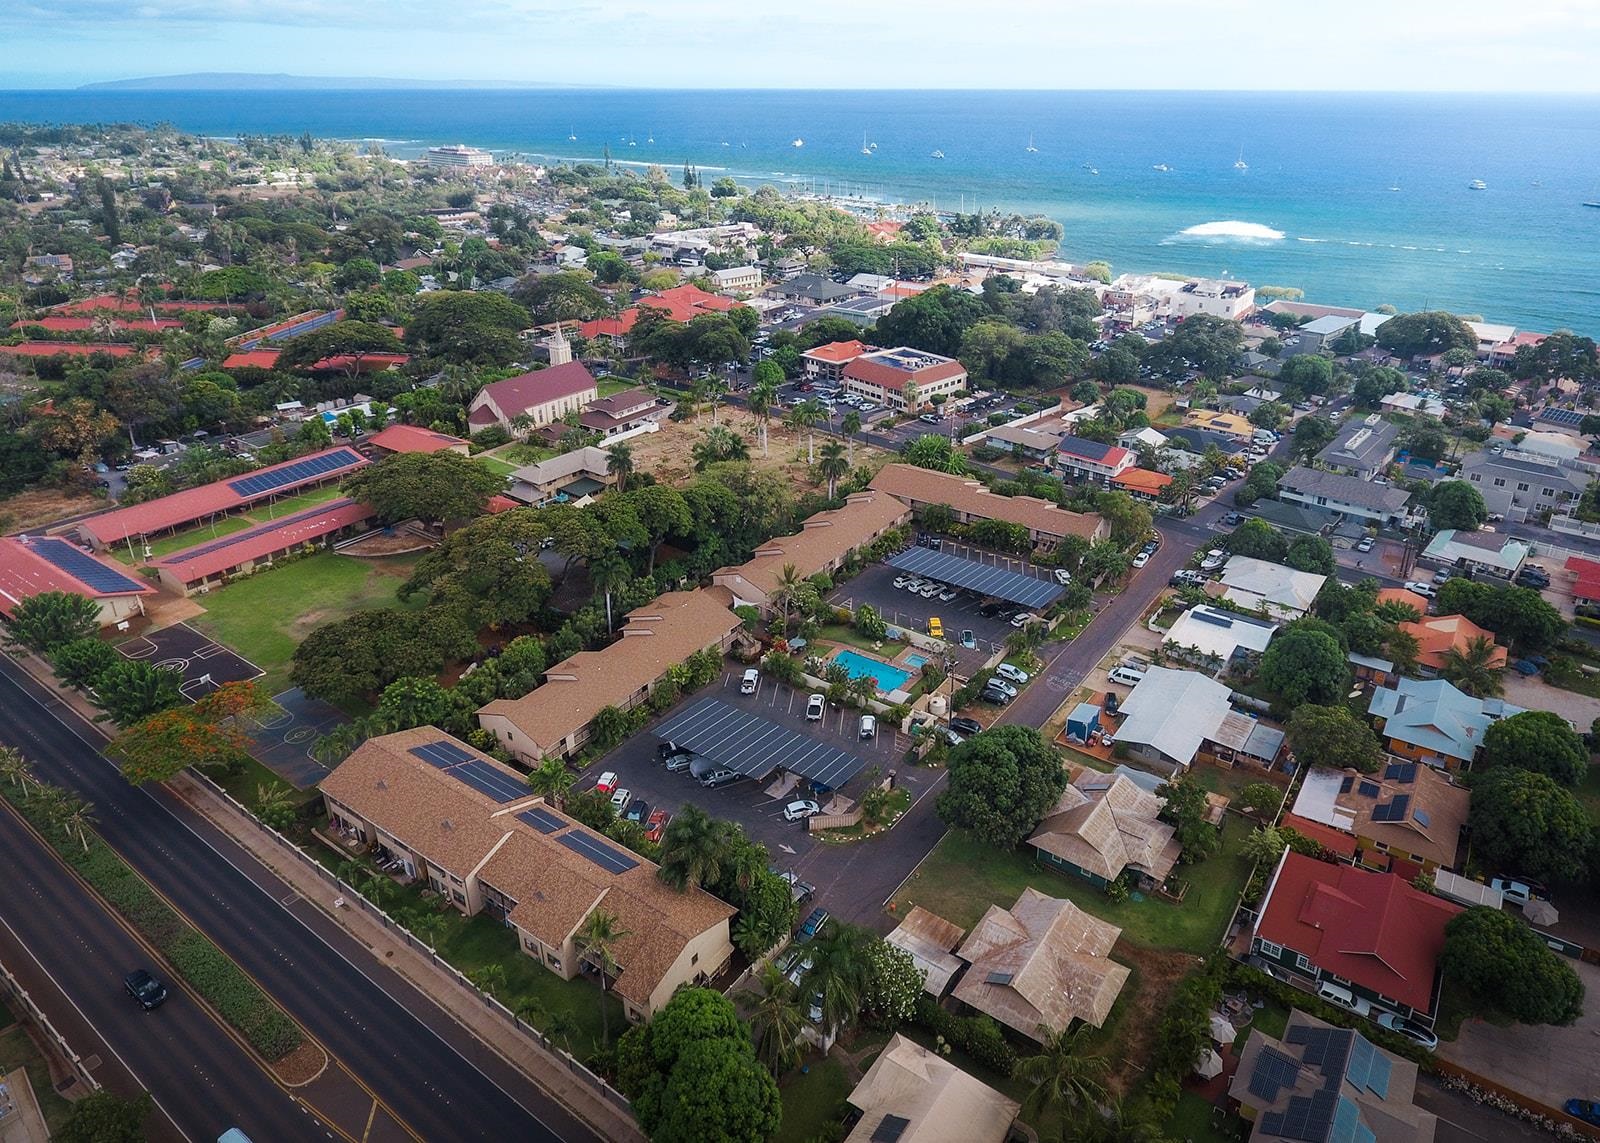 Great opportunity to own a one bedroom at the Spinnaker Condominium complex in downtown Lahaina. Close proximity to all the fun things to do in Historic Lahaina Town, restaurants, cafe's, art galleries, shopping and the Harbor. Community laundry on site. Call your favorite Agent today, this will not last long!